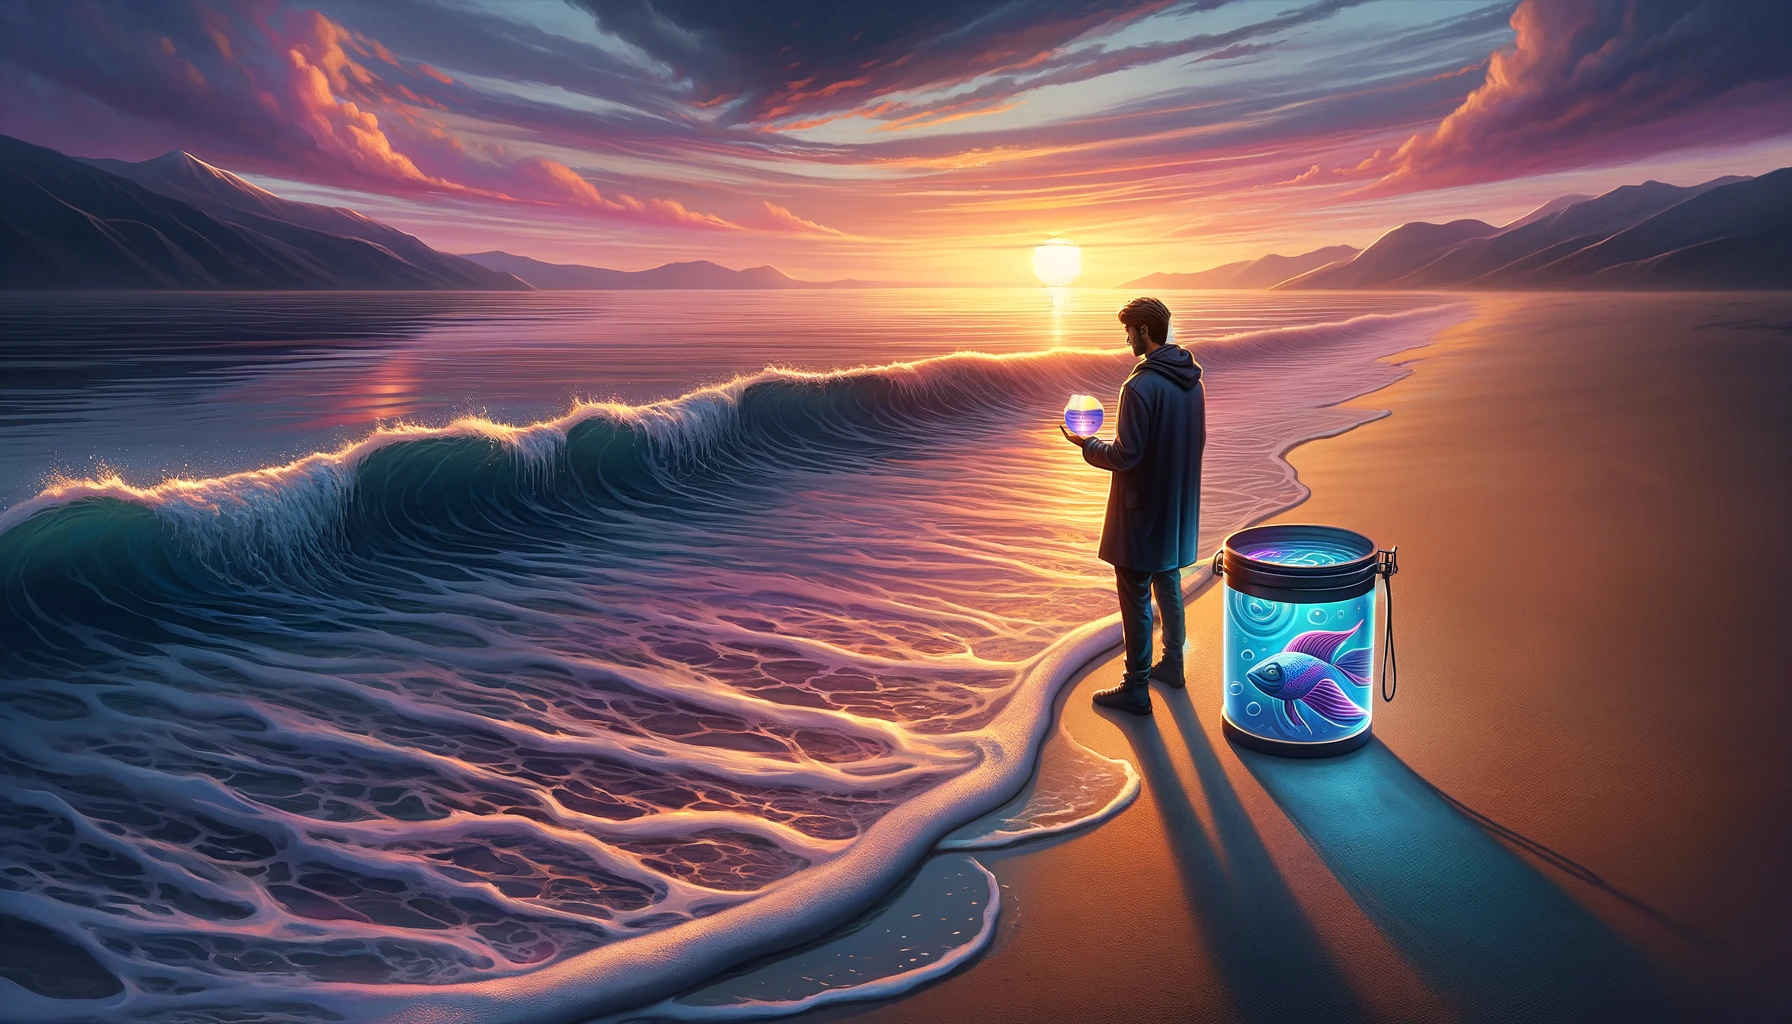 An image of a serene beach at sunset with gentle waves caressing the shore. A lone figure stands by the water holding a cup adorned with a fish moti